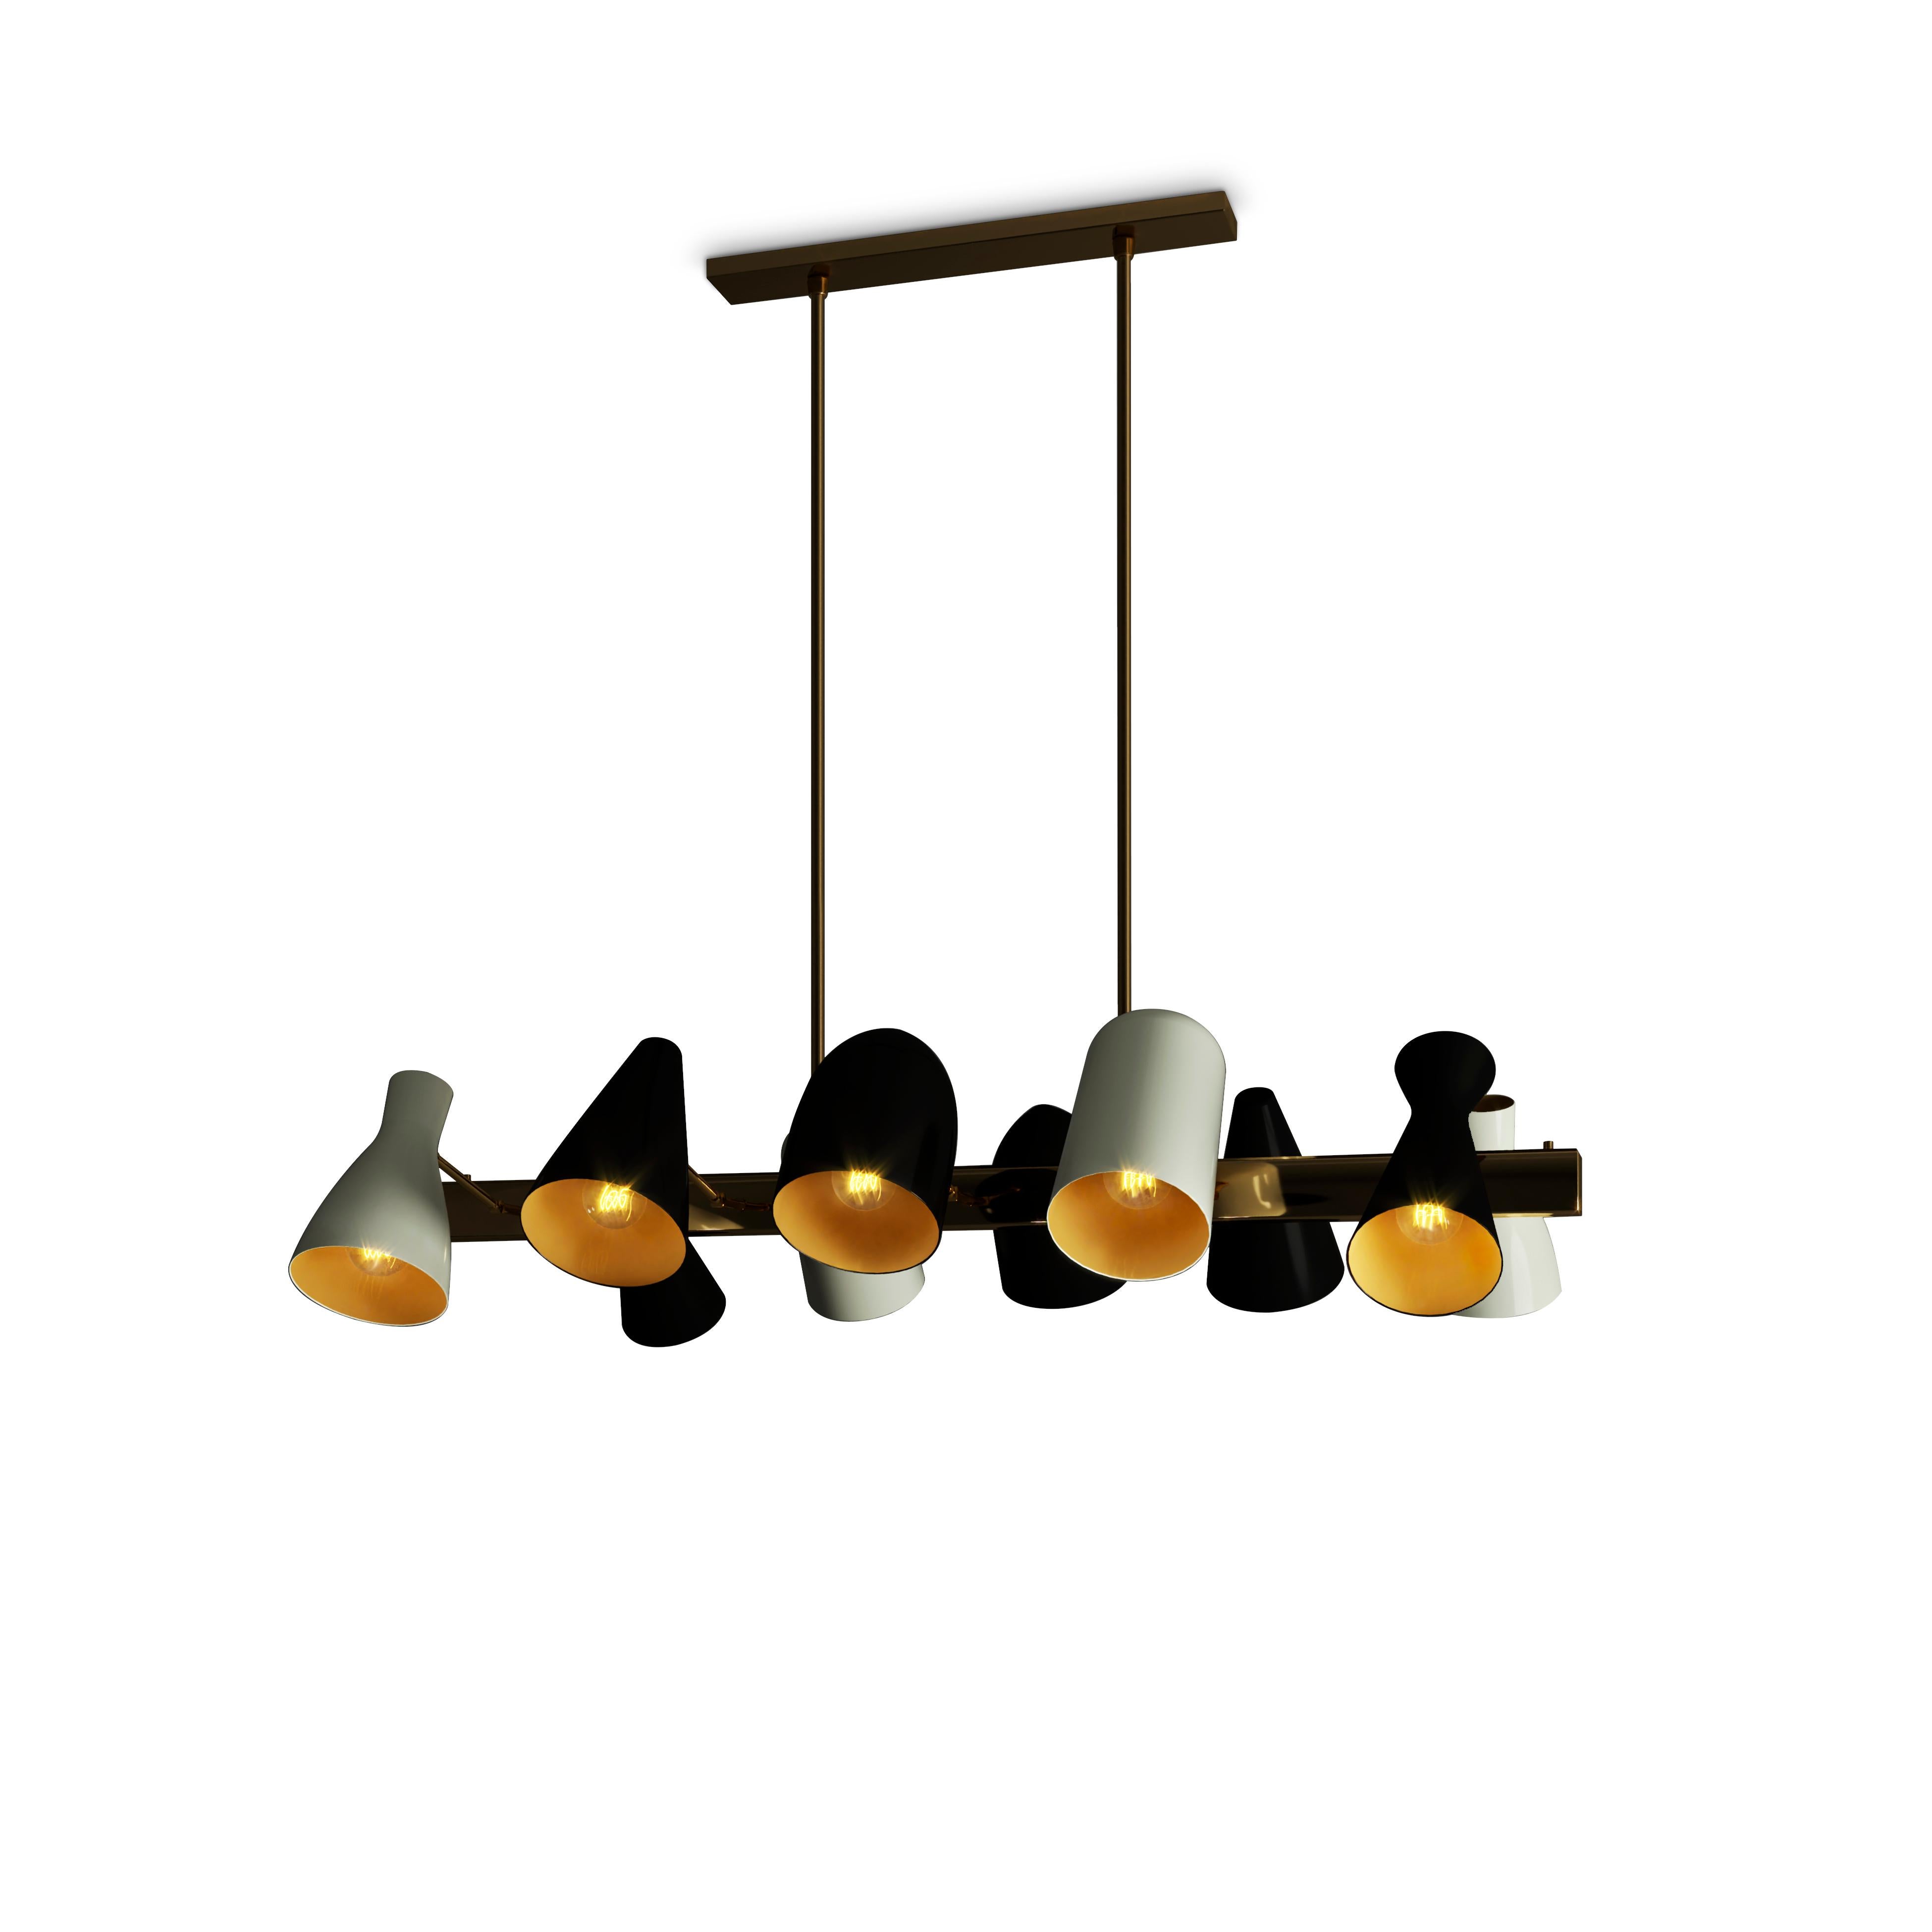 Portuguese 21st Century Jordaan Suspension Lamp Brass Aluminium by Creativemary For Sale